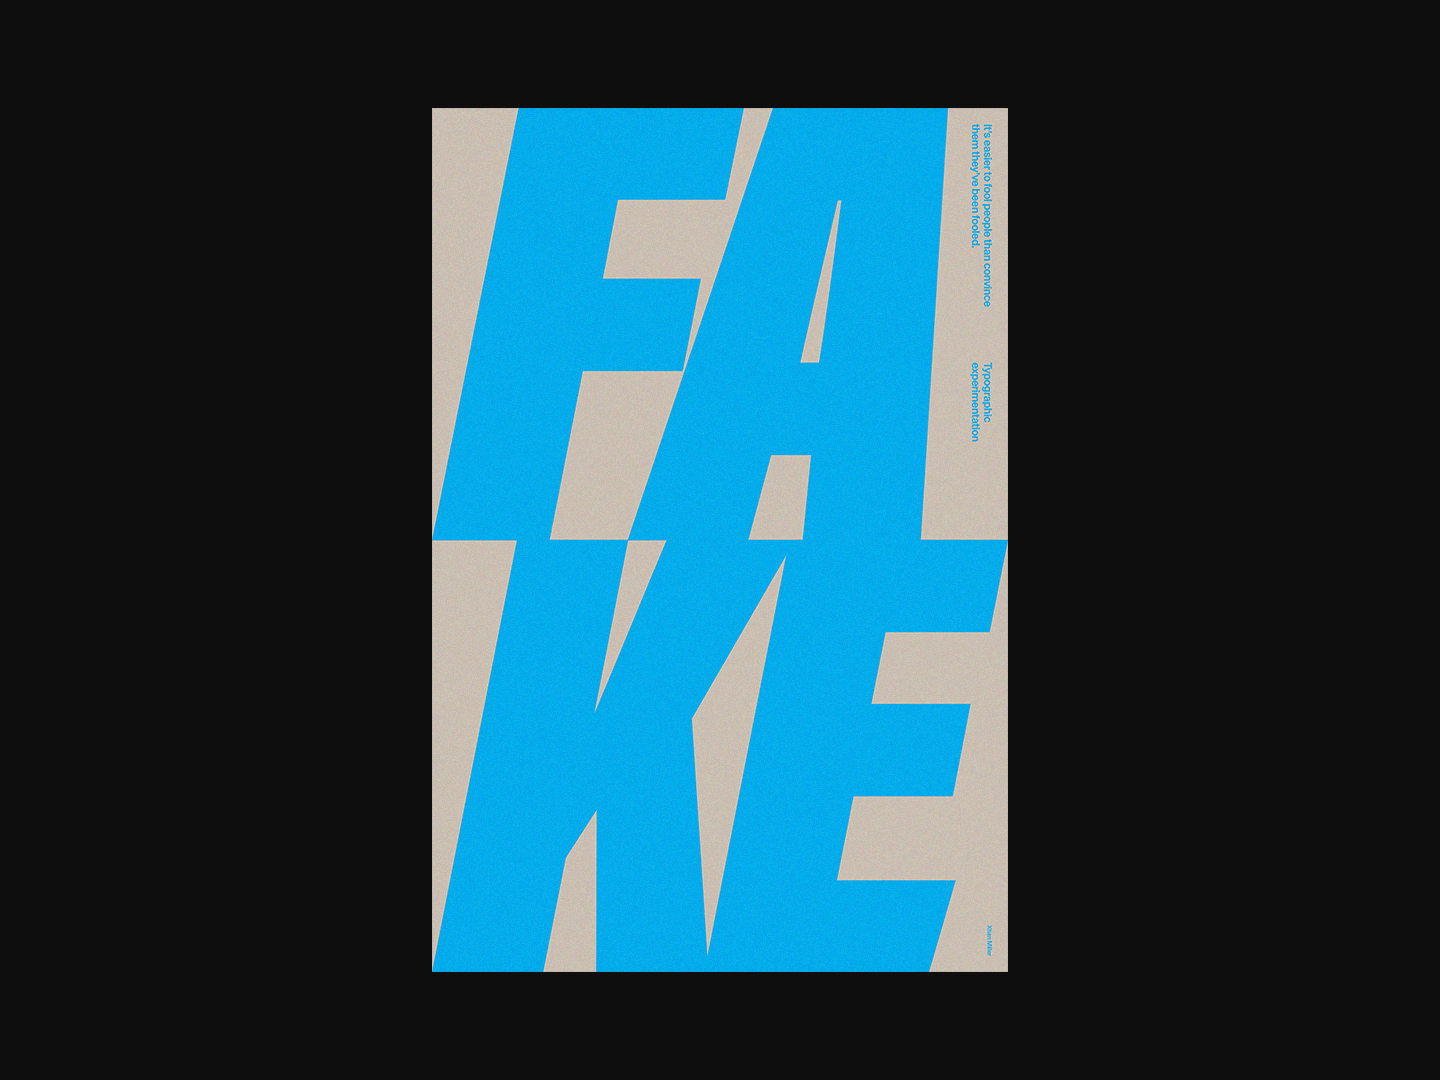 Fake by Xtian Miller on Dribbble